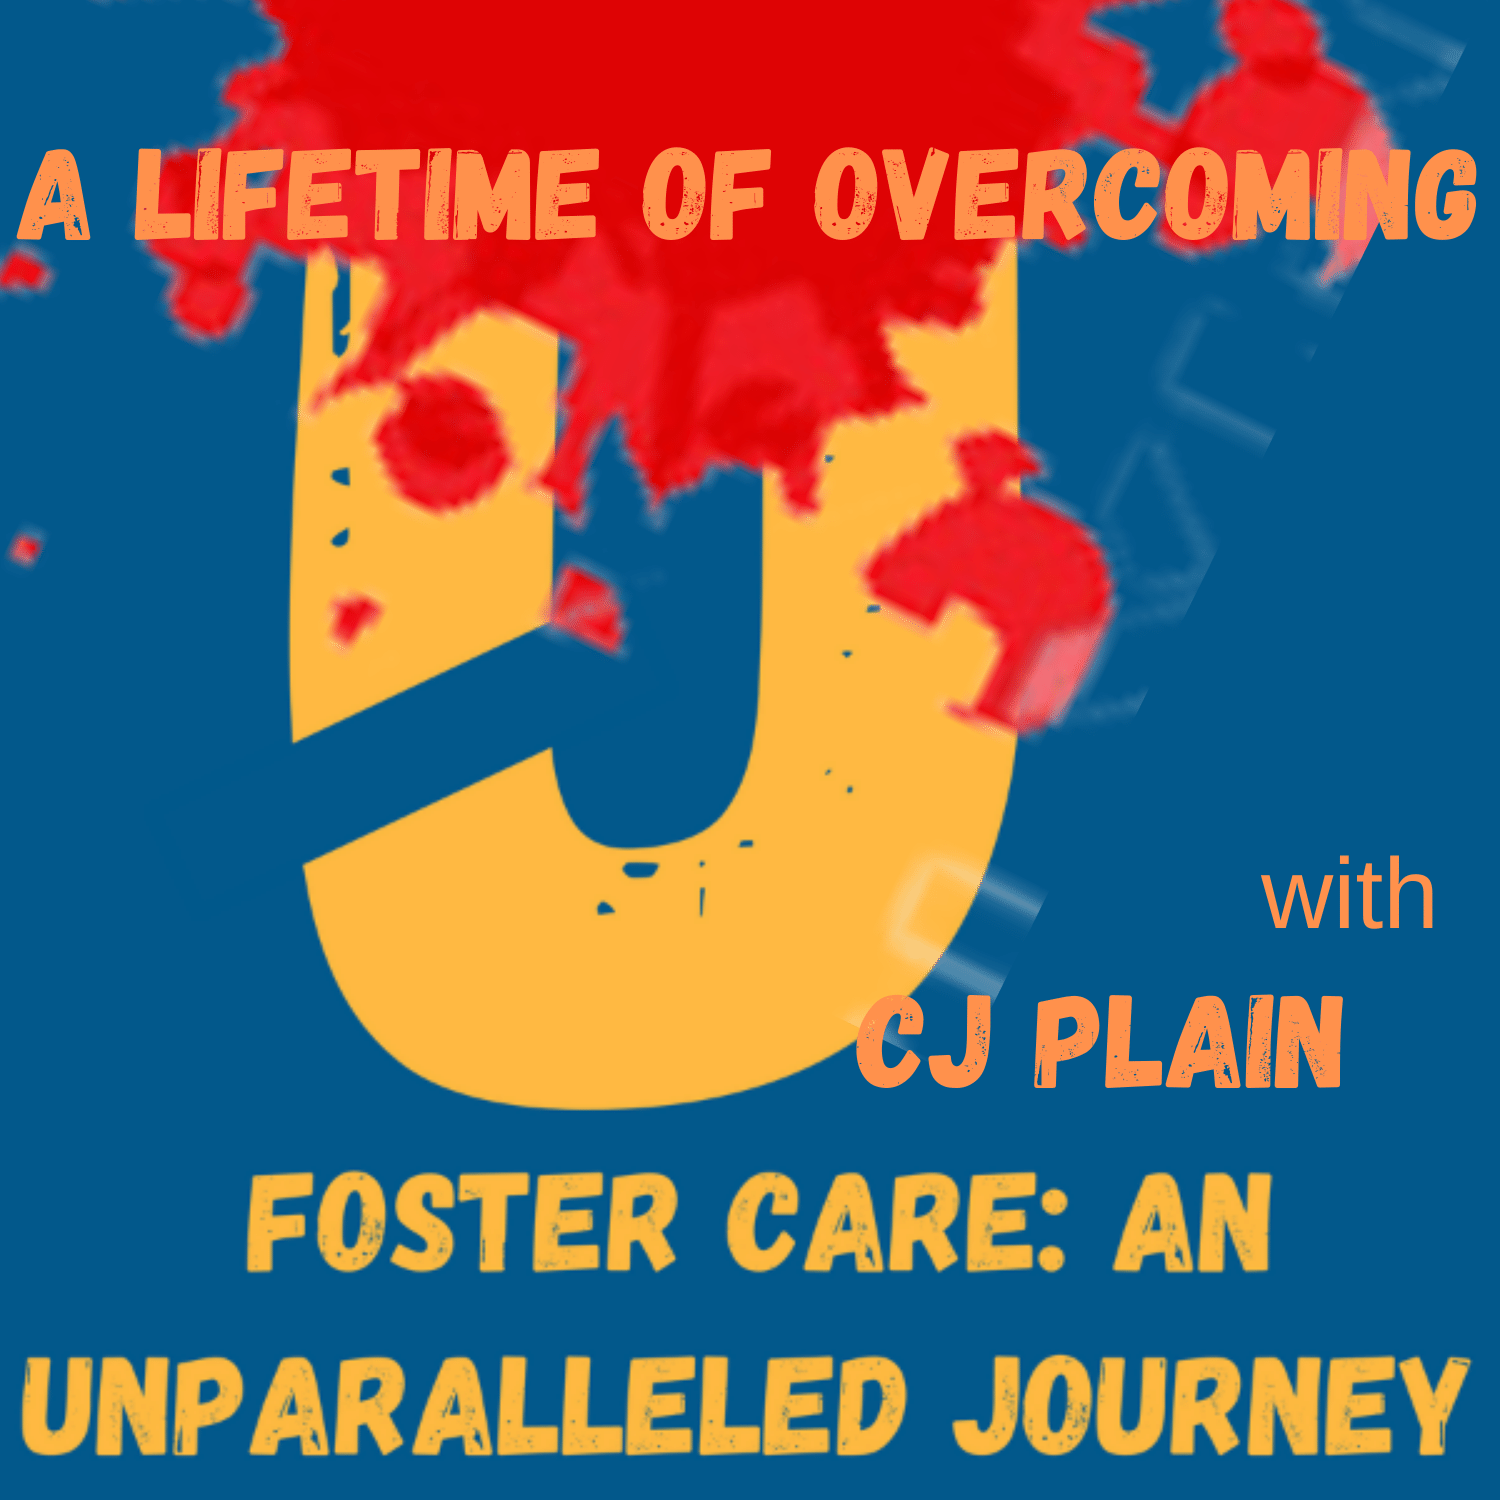 A Lifetime of Overcoming with CJ Plain